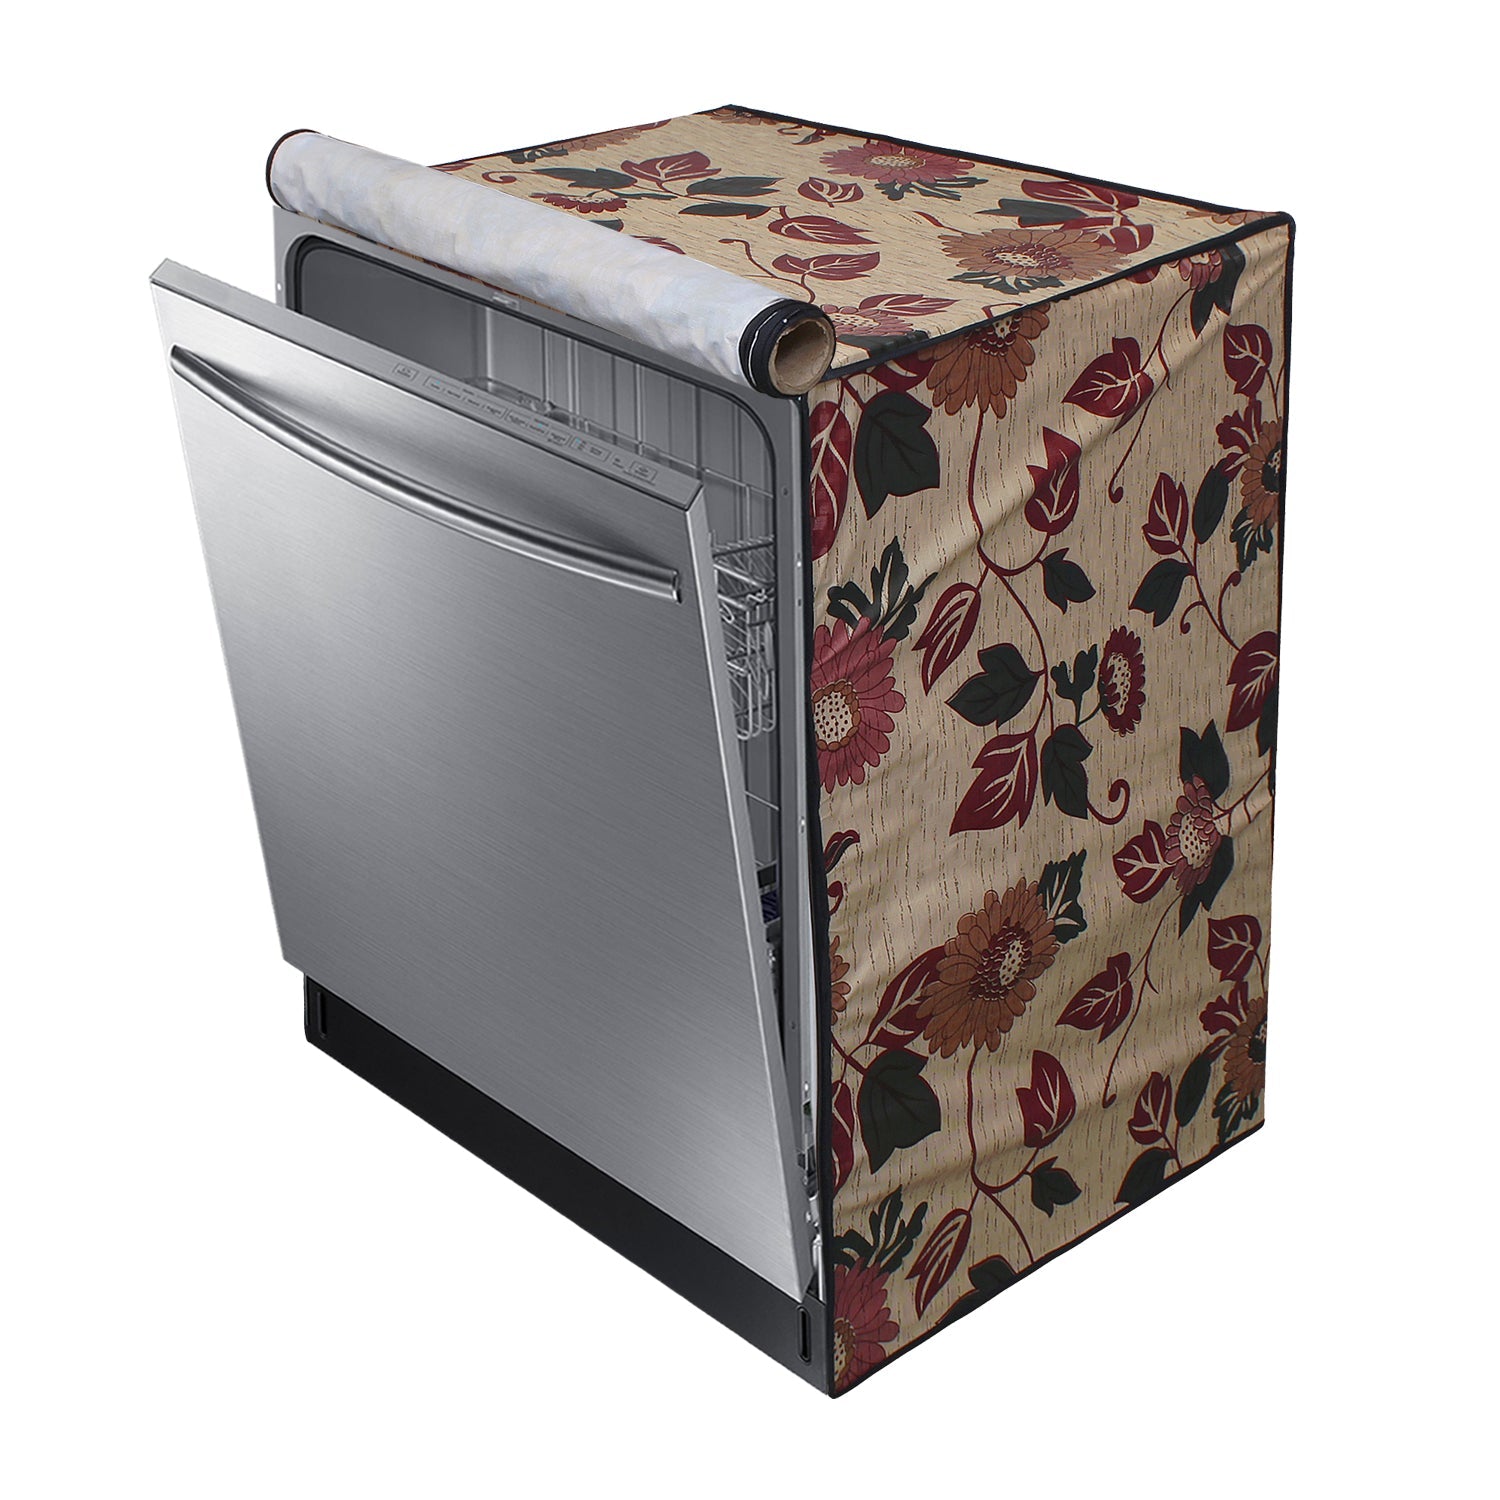 Waterproof and Dustproof Dishwasher Cover, SA03 - Dream Care Furnishings Private Limited